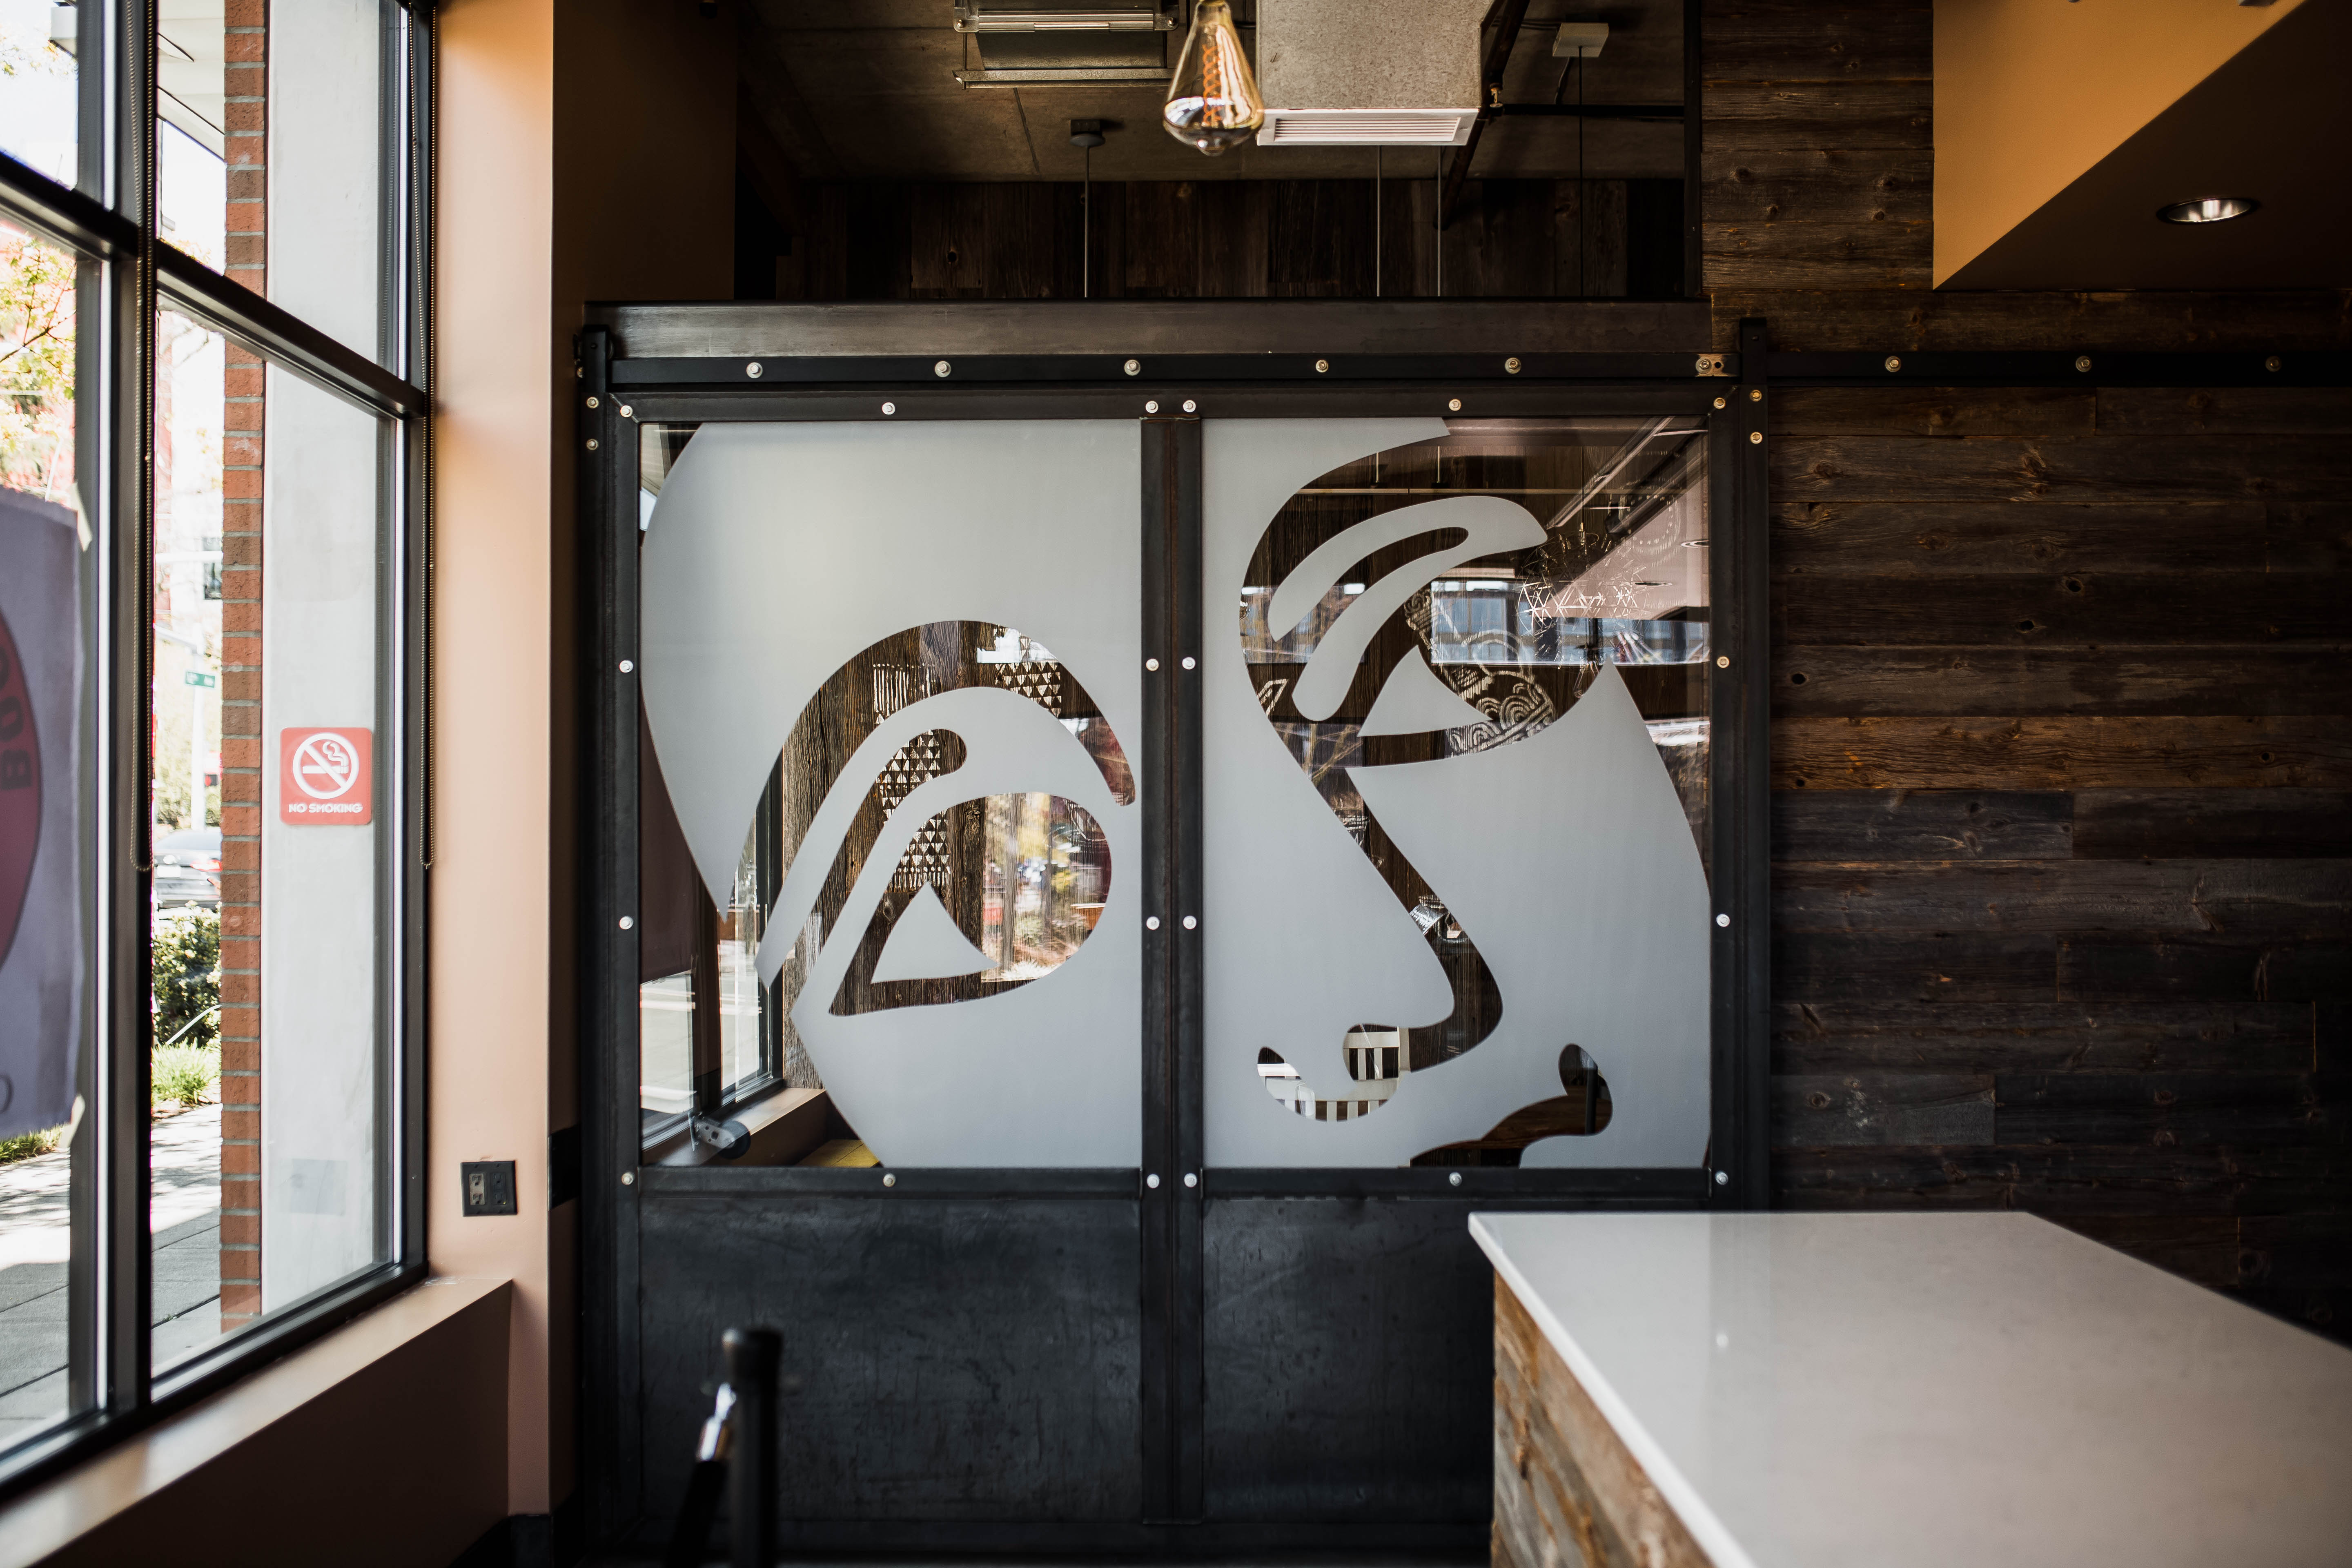 Two closed glass doors at Boon Boona coffee shop in Capitol Hill depict the company’s logo, a drawing of a human face looking off into the distance